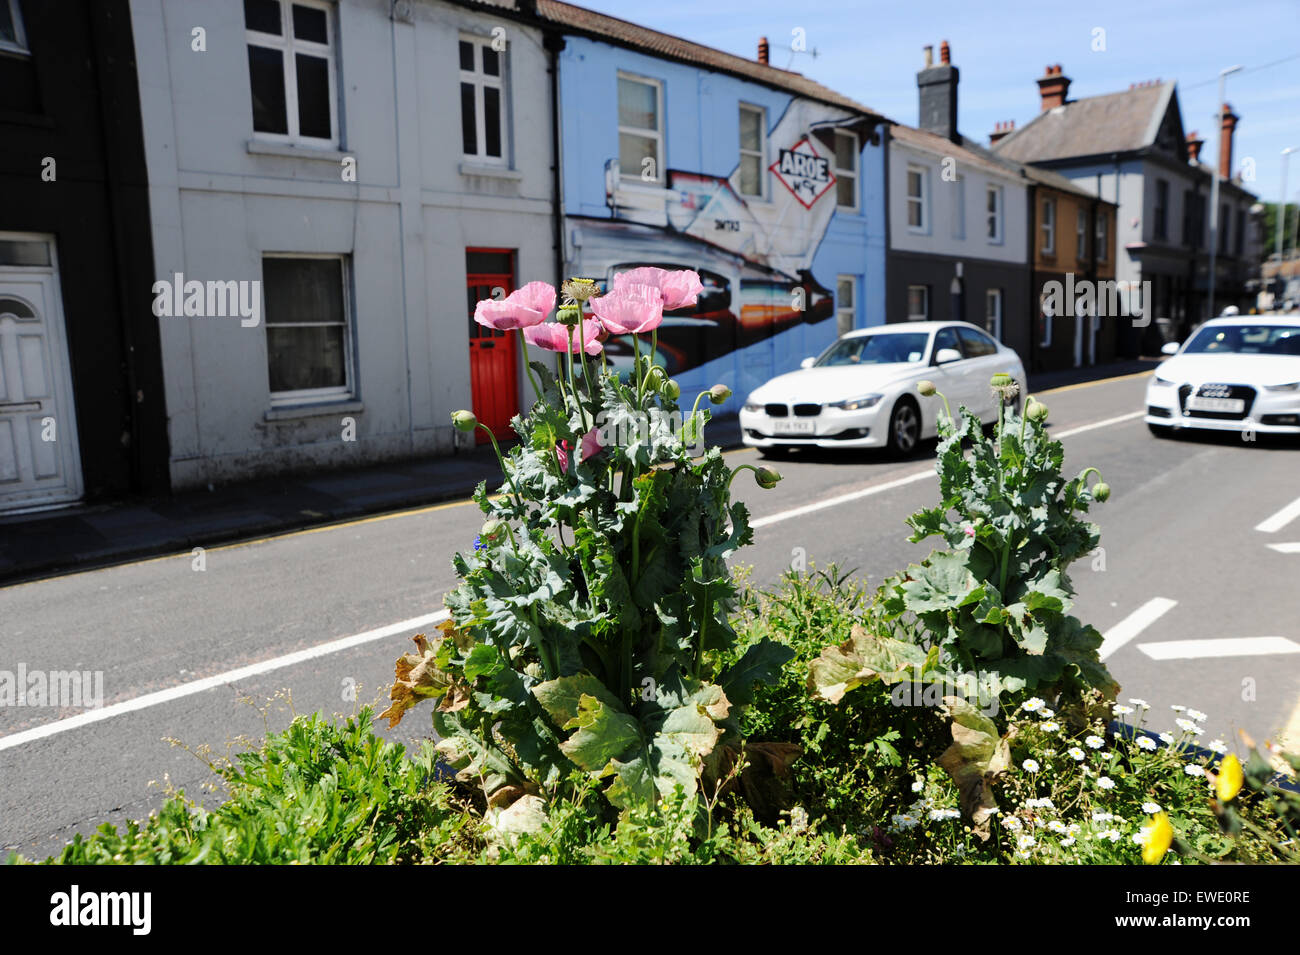 Brighton, UK. 24th June, 2015. The controversial traffic calming plant pots in Viaduct Road Brighton are now bursting into life with wild flowers including poppies coming into flower The four planters caused a major stir when they were introduced by the city council back in February and were branded as dangerous by both drivers and local residents Stock Photo